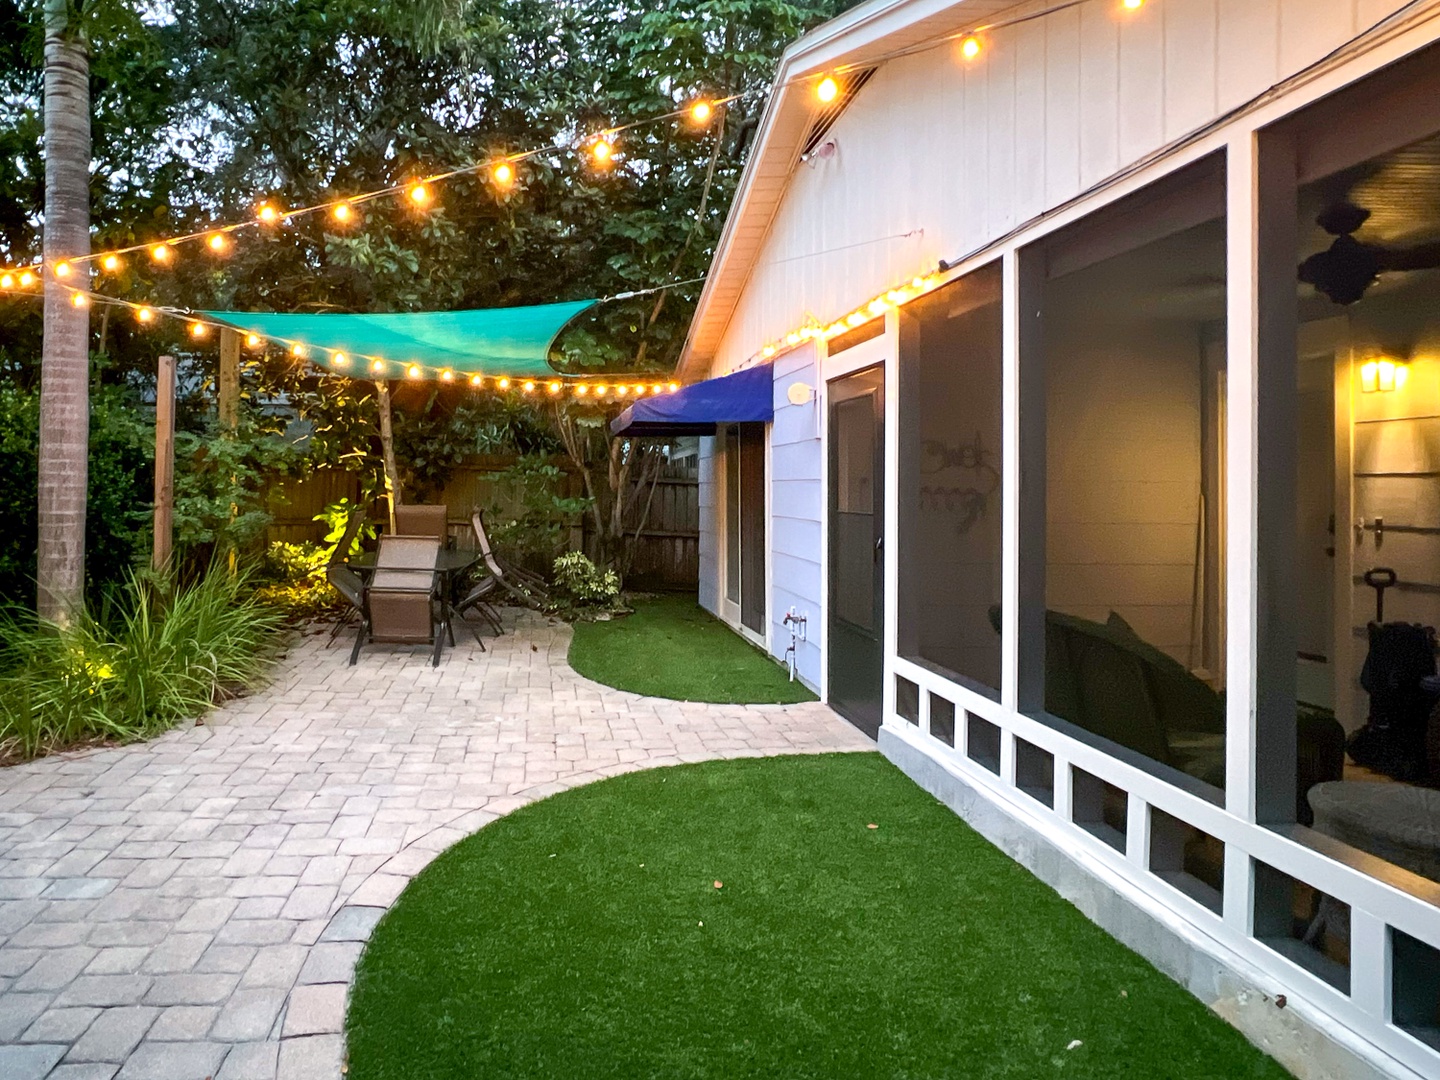 Backyard outside the screened porch - synthetic turf, pavers and landscaping